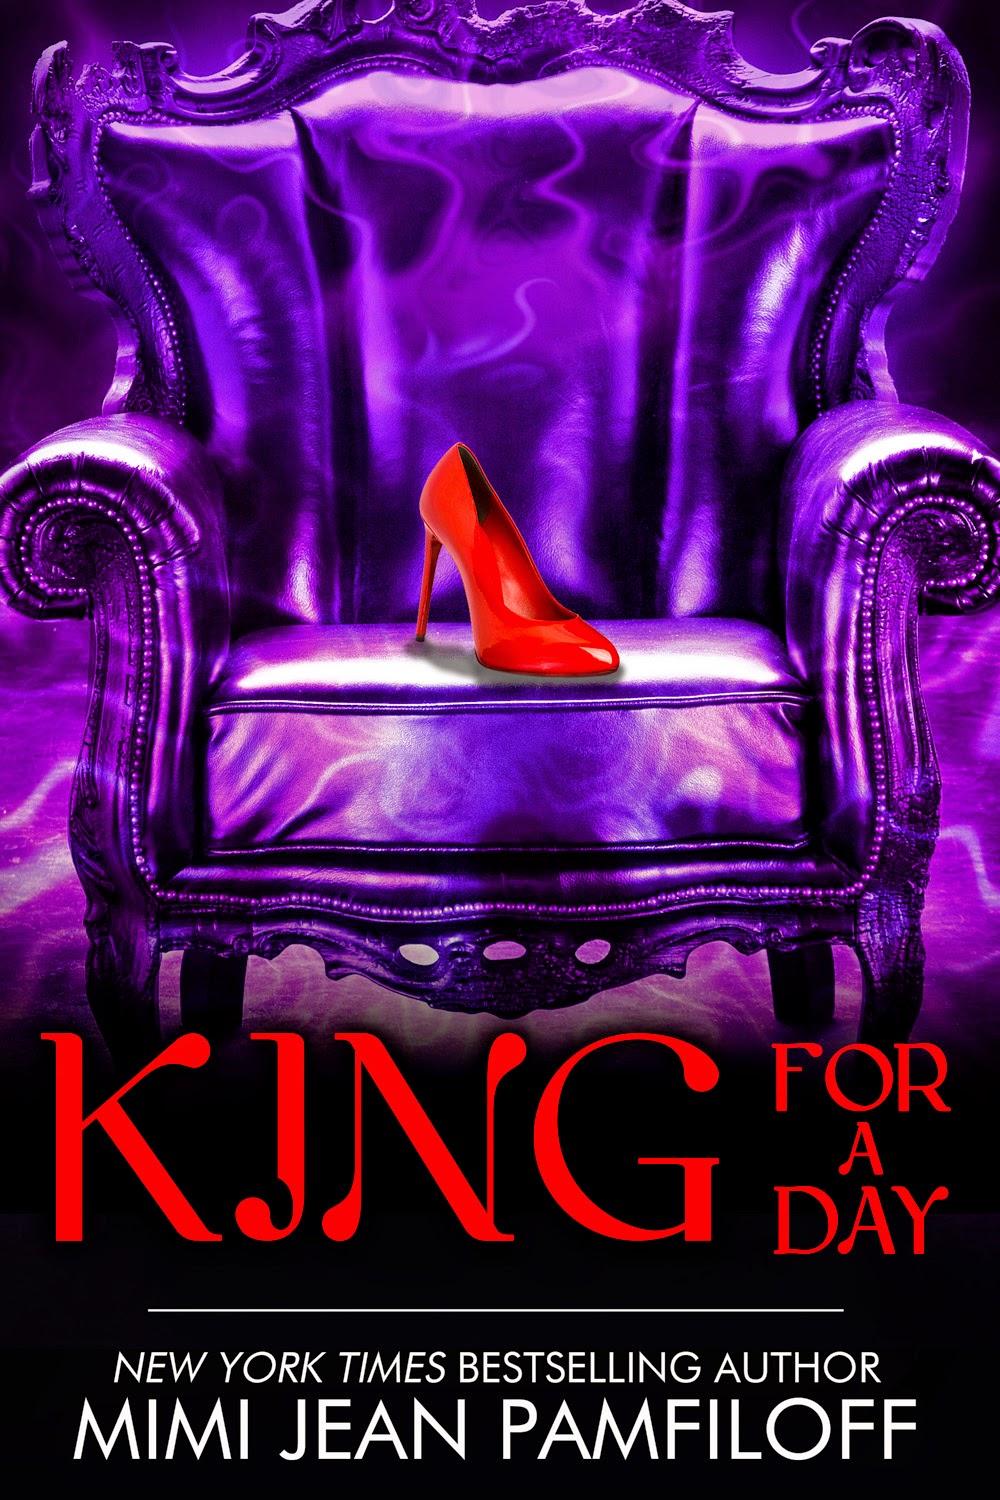 https://www.goodreads.com/book/show/22042981-king-for-a-day